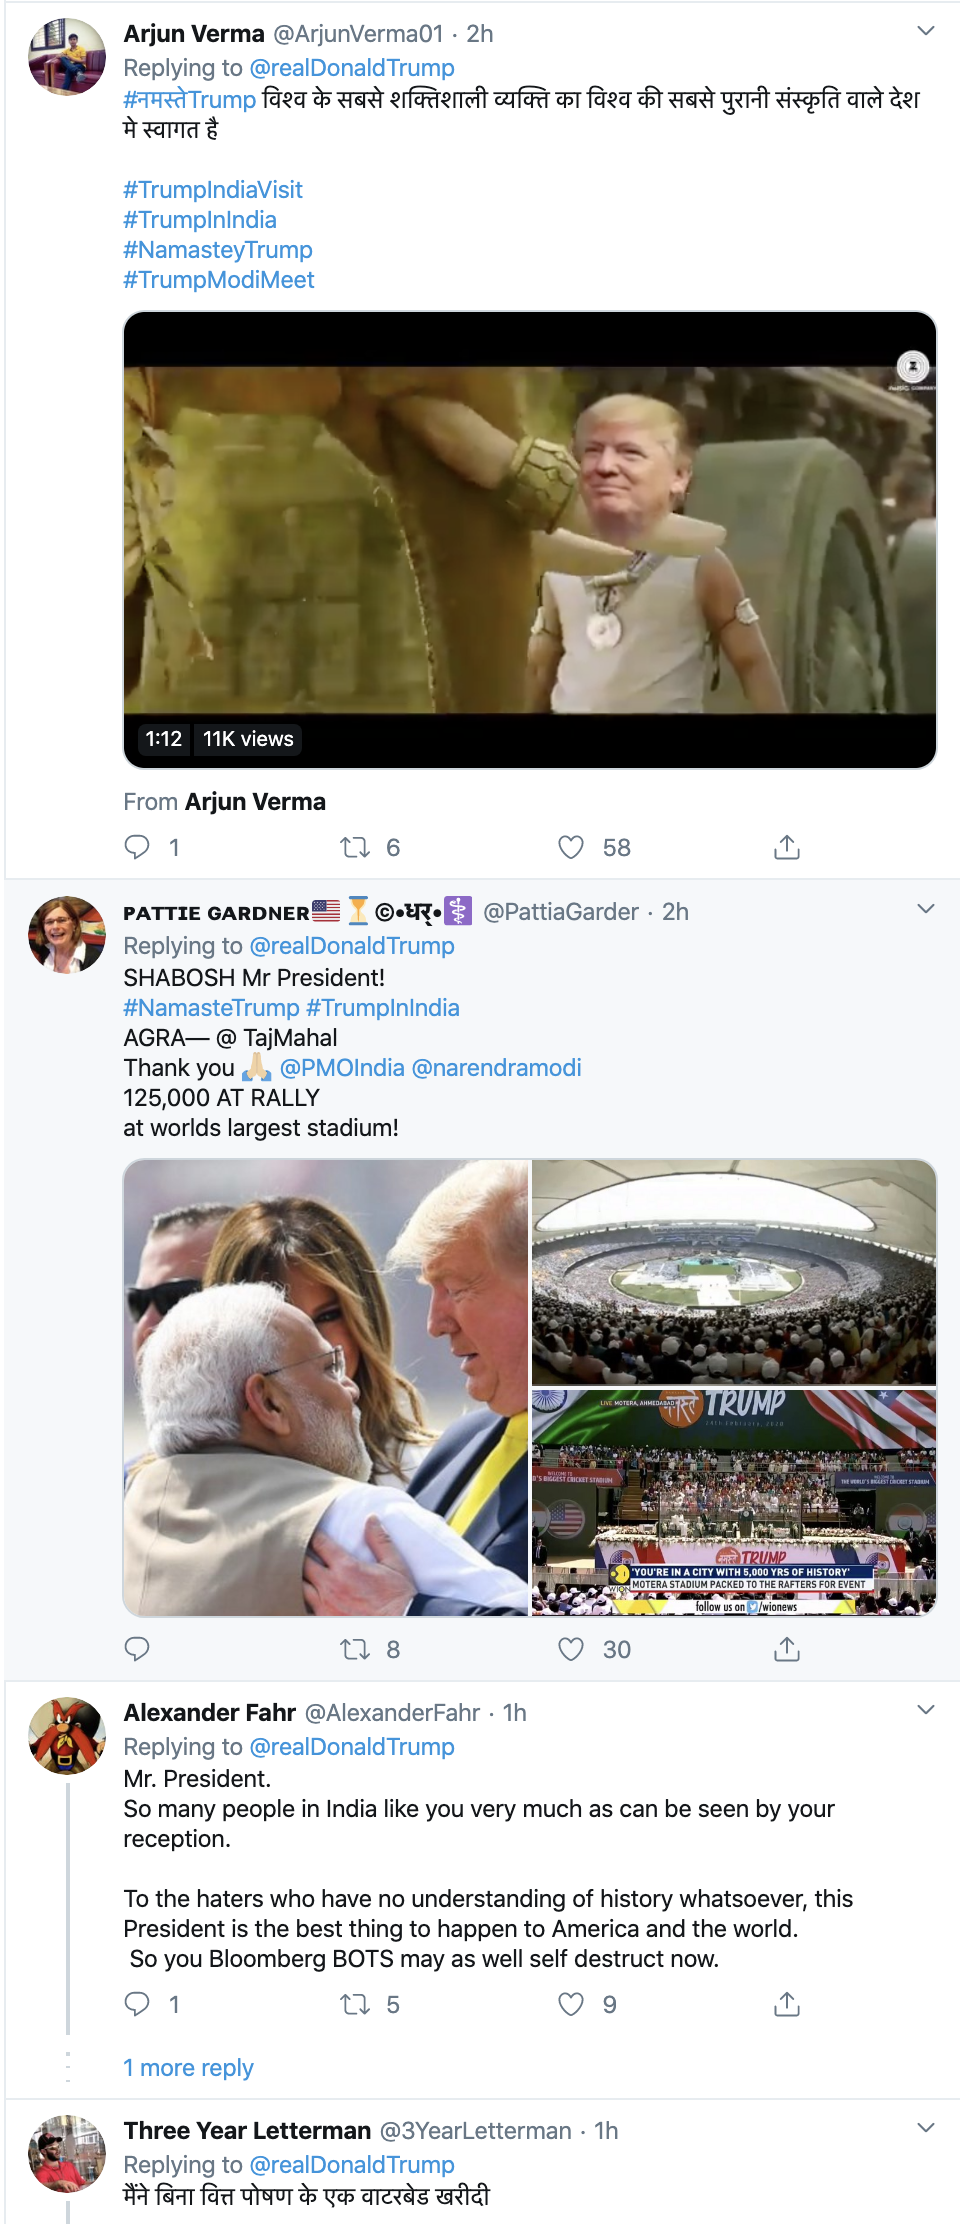 Screen-Shot-2020-02-24-at-7.21.03-AM Trump Tweets Arrival In India & Gets Mocked Online Donald Trump Featured Foreign Policy Politics Top Stories 